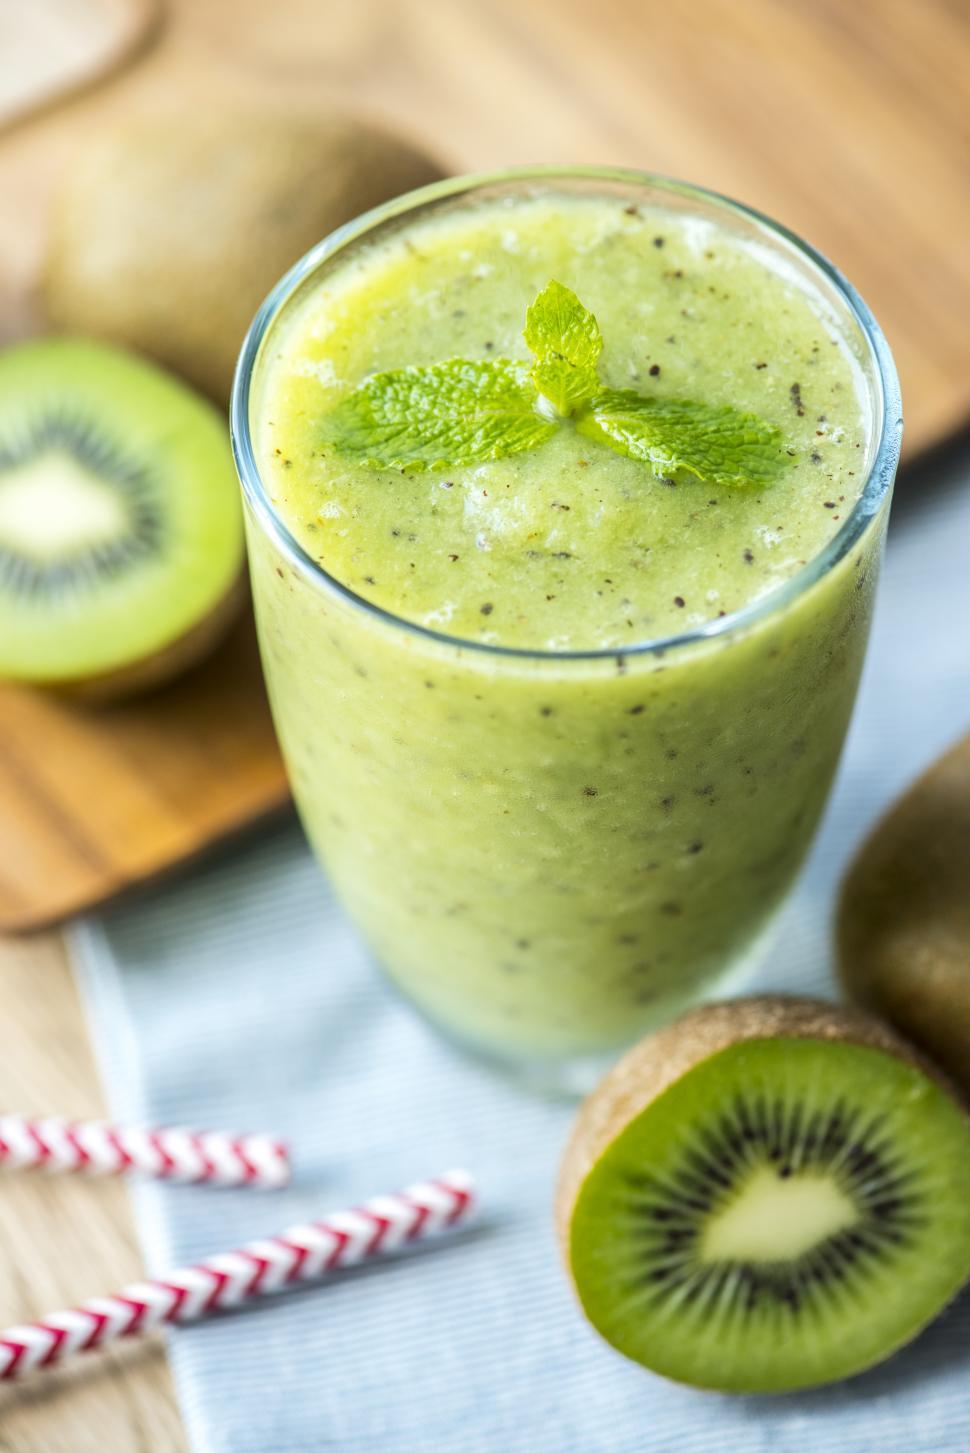 close up of a green smoothie in a glass cup with kiwi and straws on the table next to it